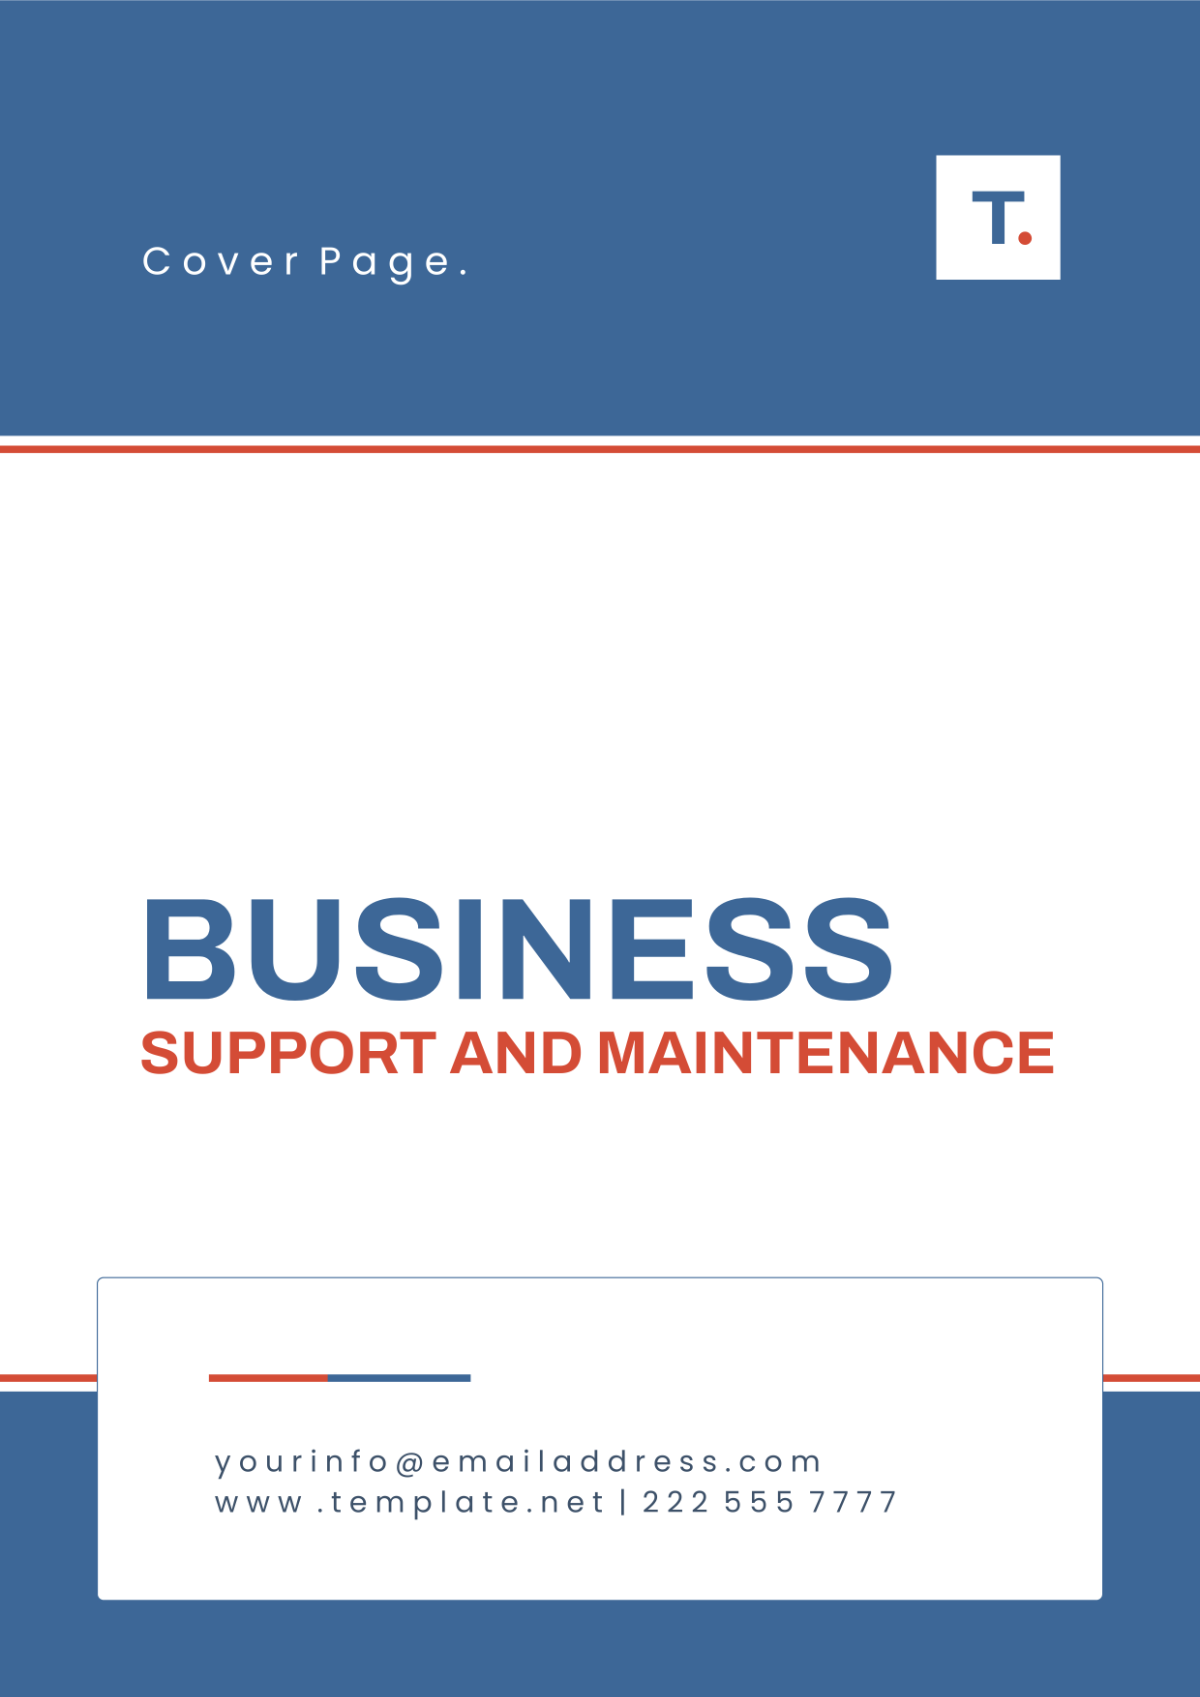 Business Support and Maintenance Cover Page Template